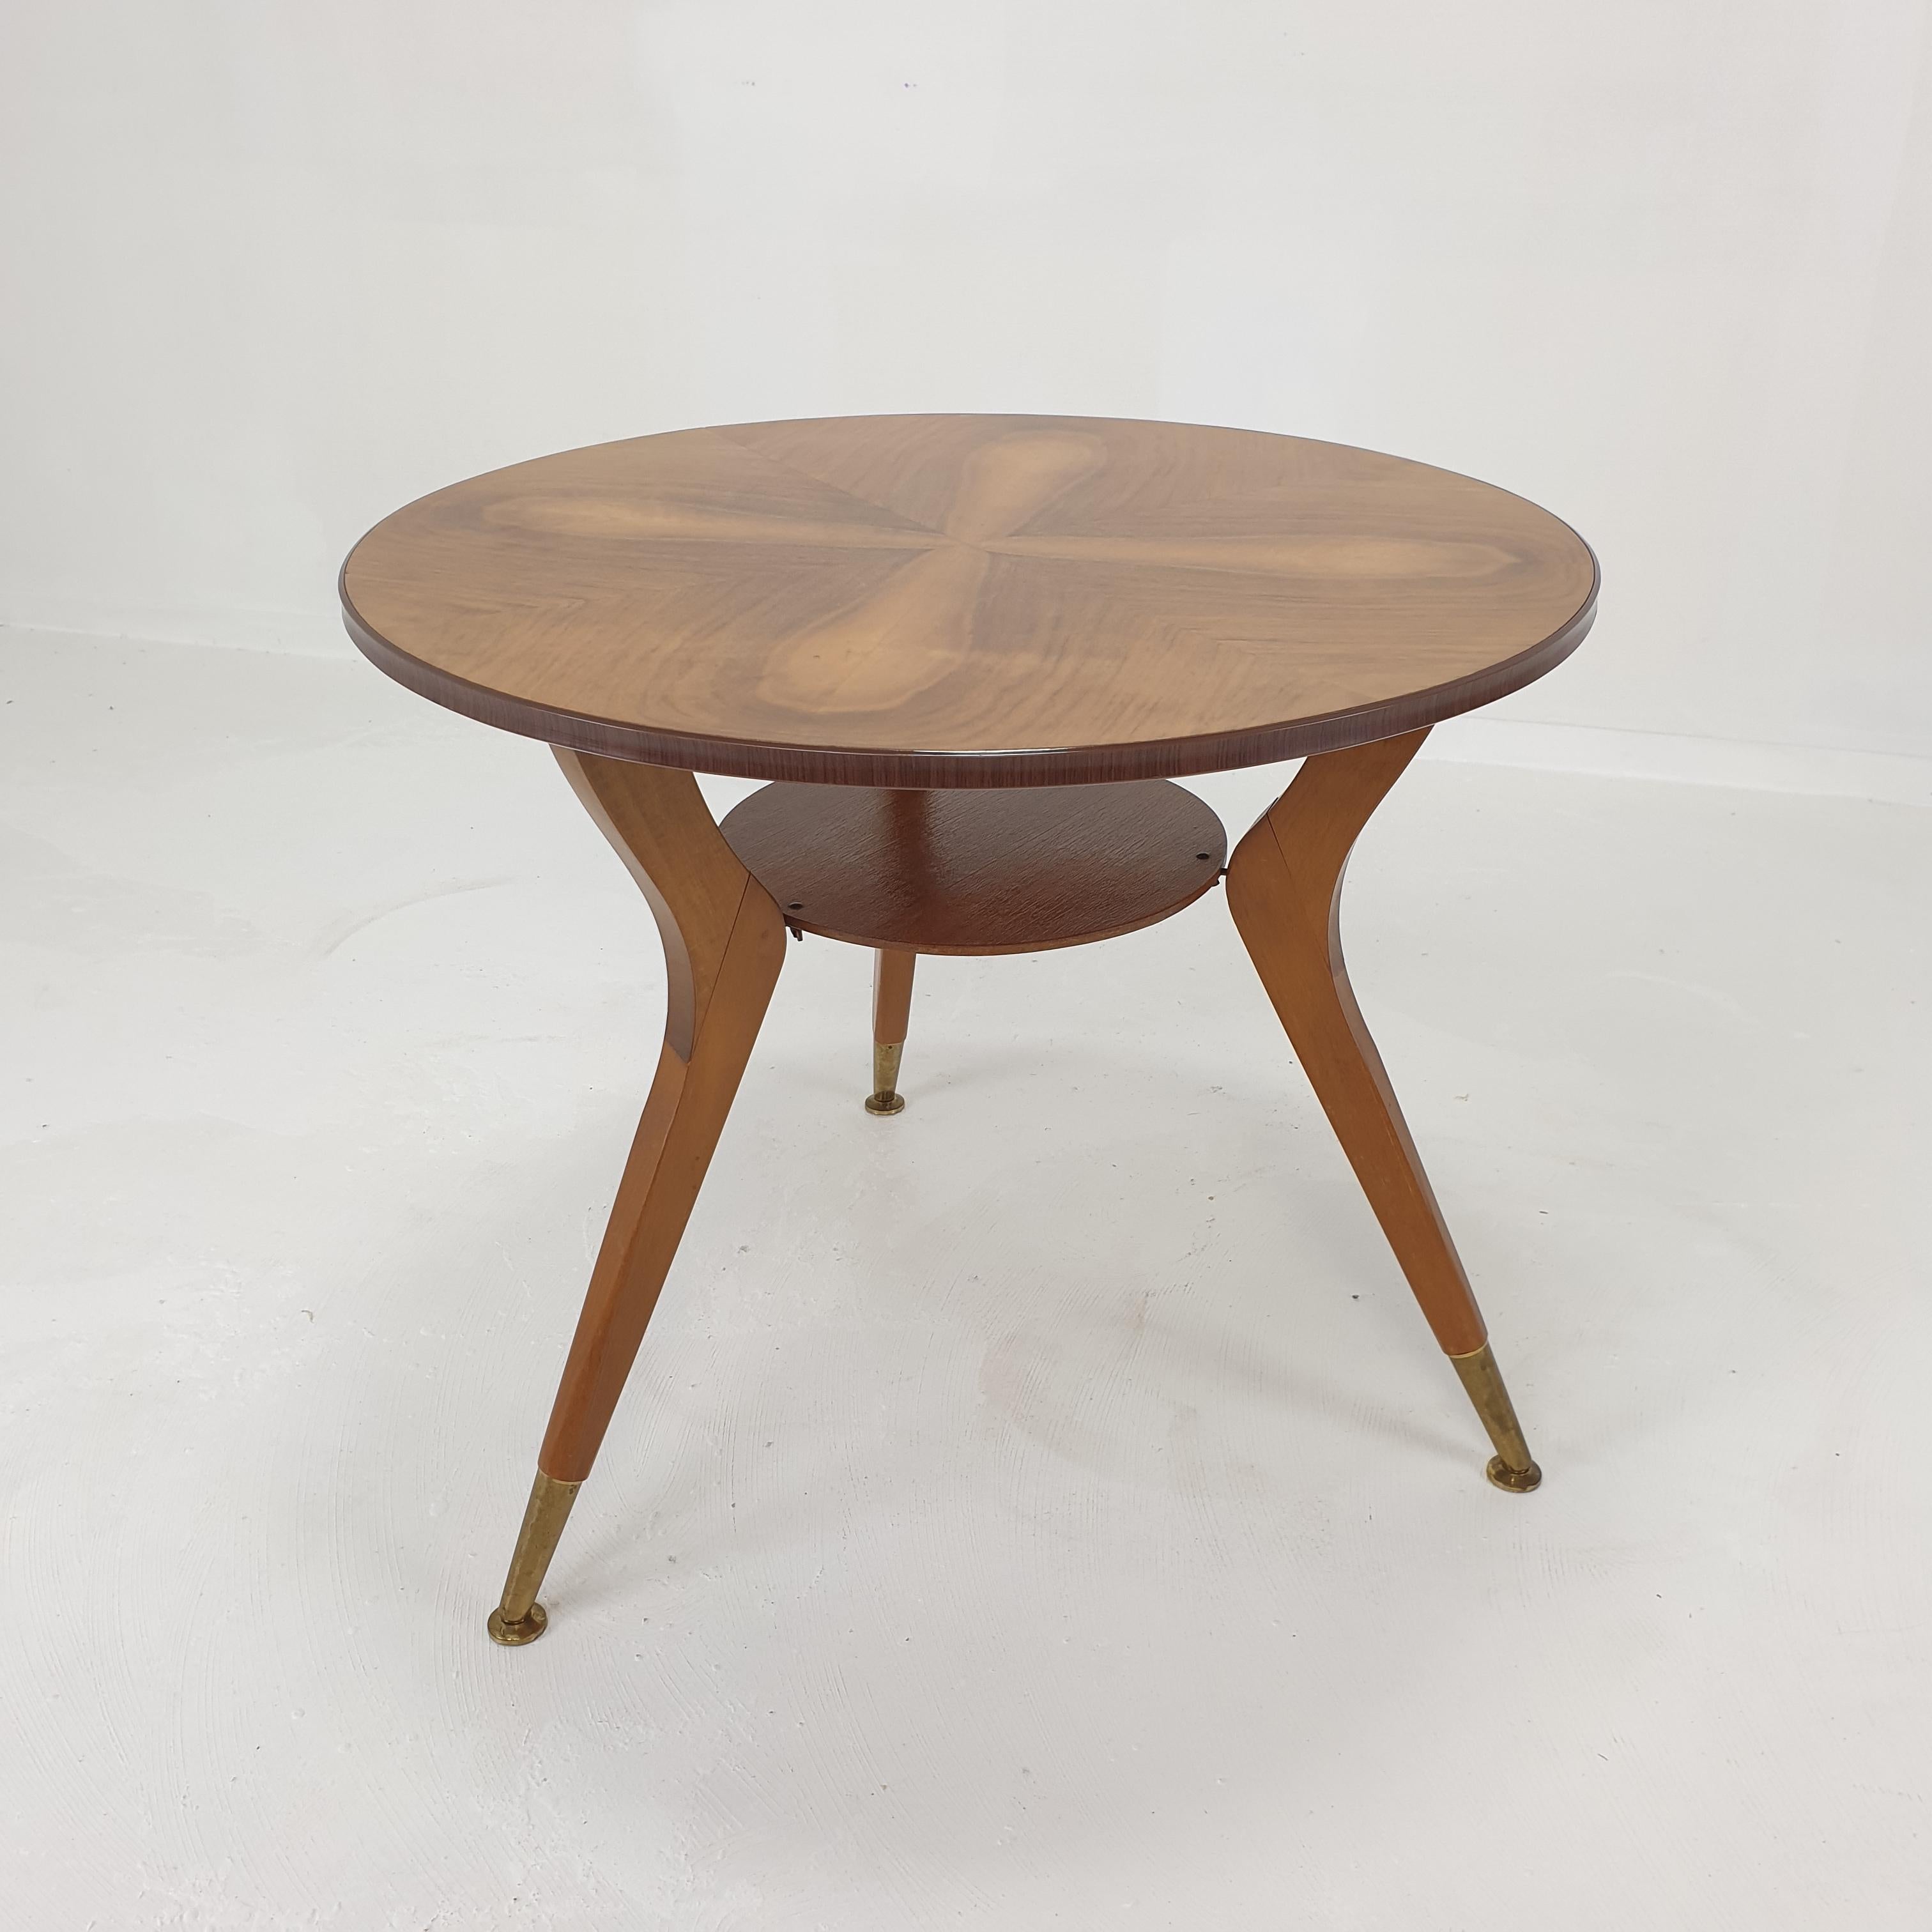 Mid-Century Modern Midcentury Italian Wooden Coffee or Side Table with Brass Feet, 1960s For Sale